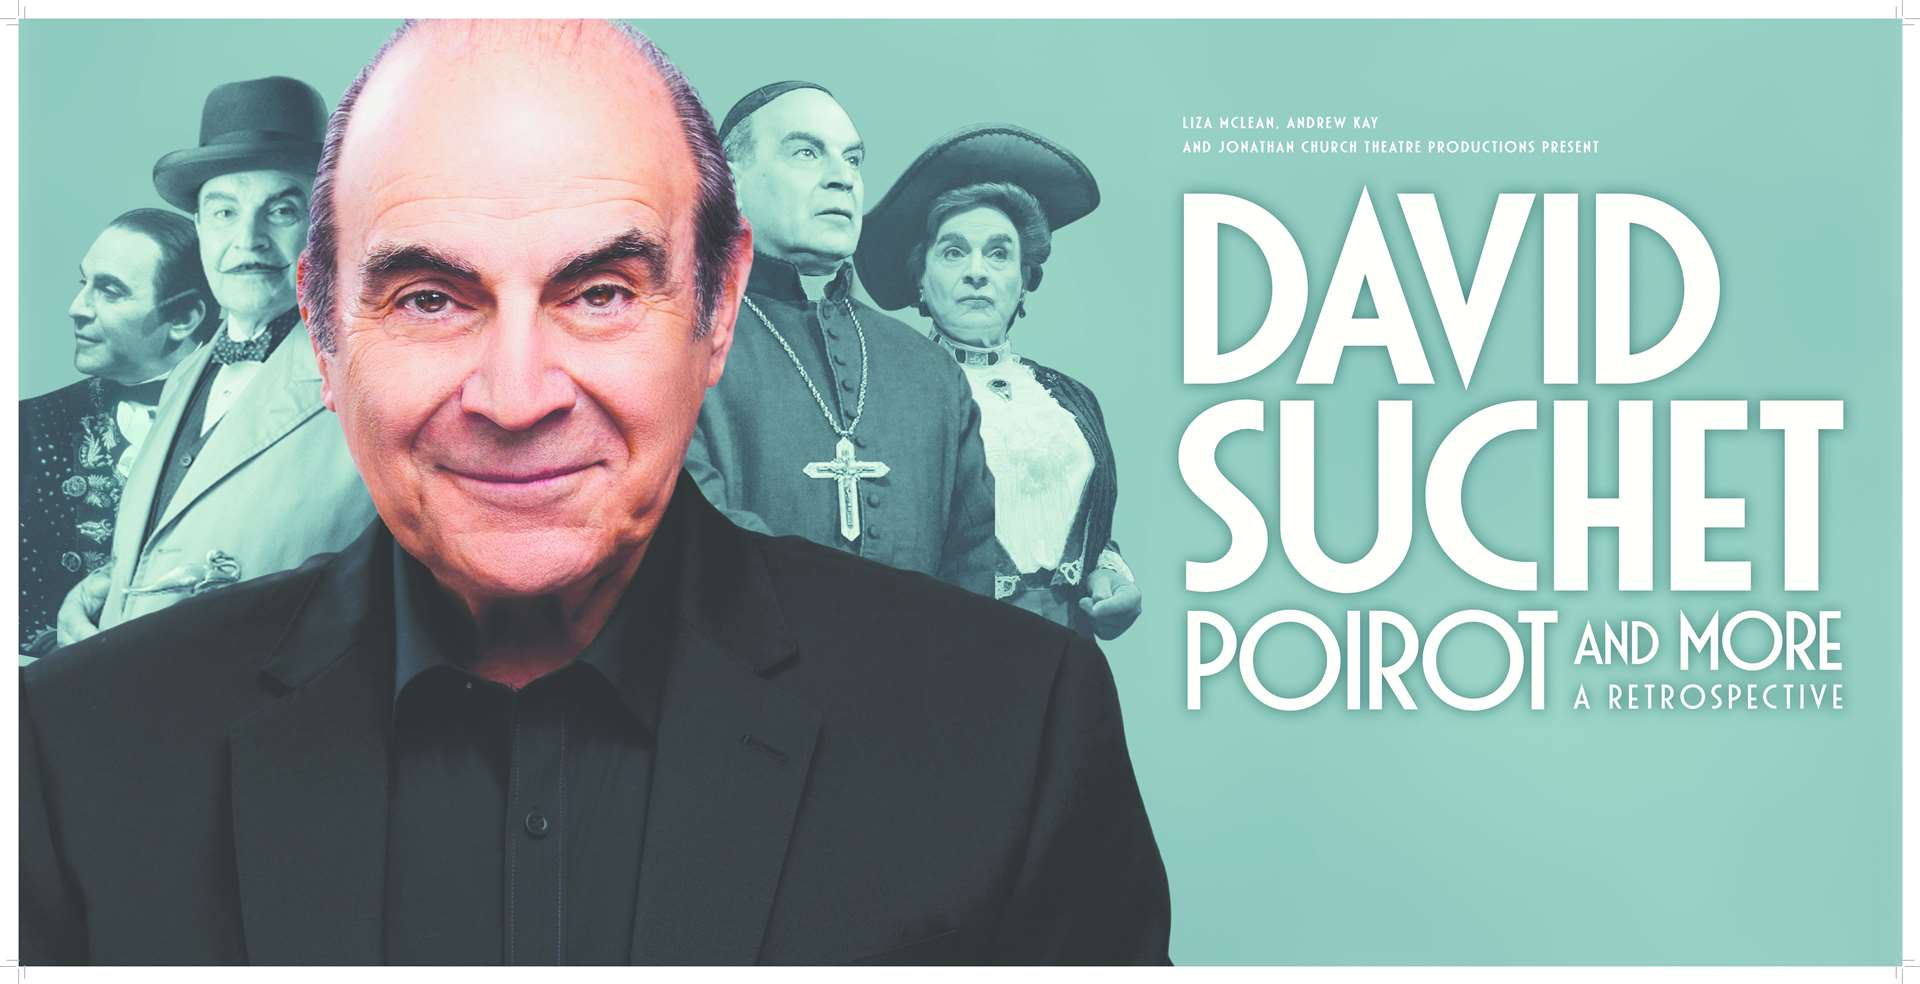 David Suchet comes to the Music Hall, Aberdeen